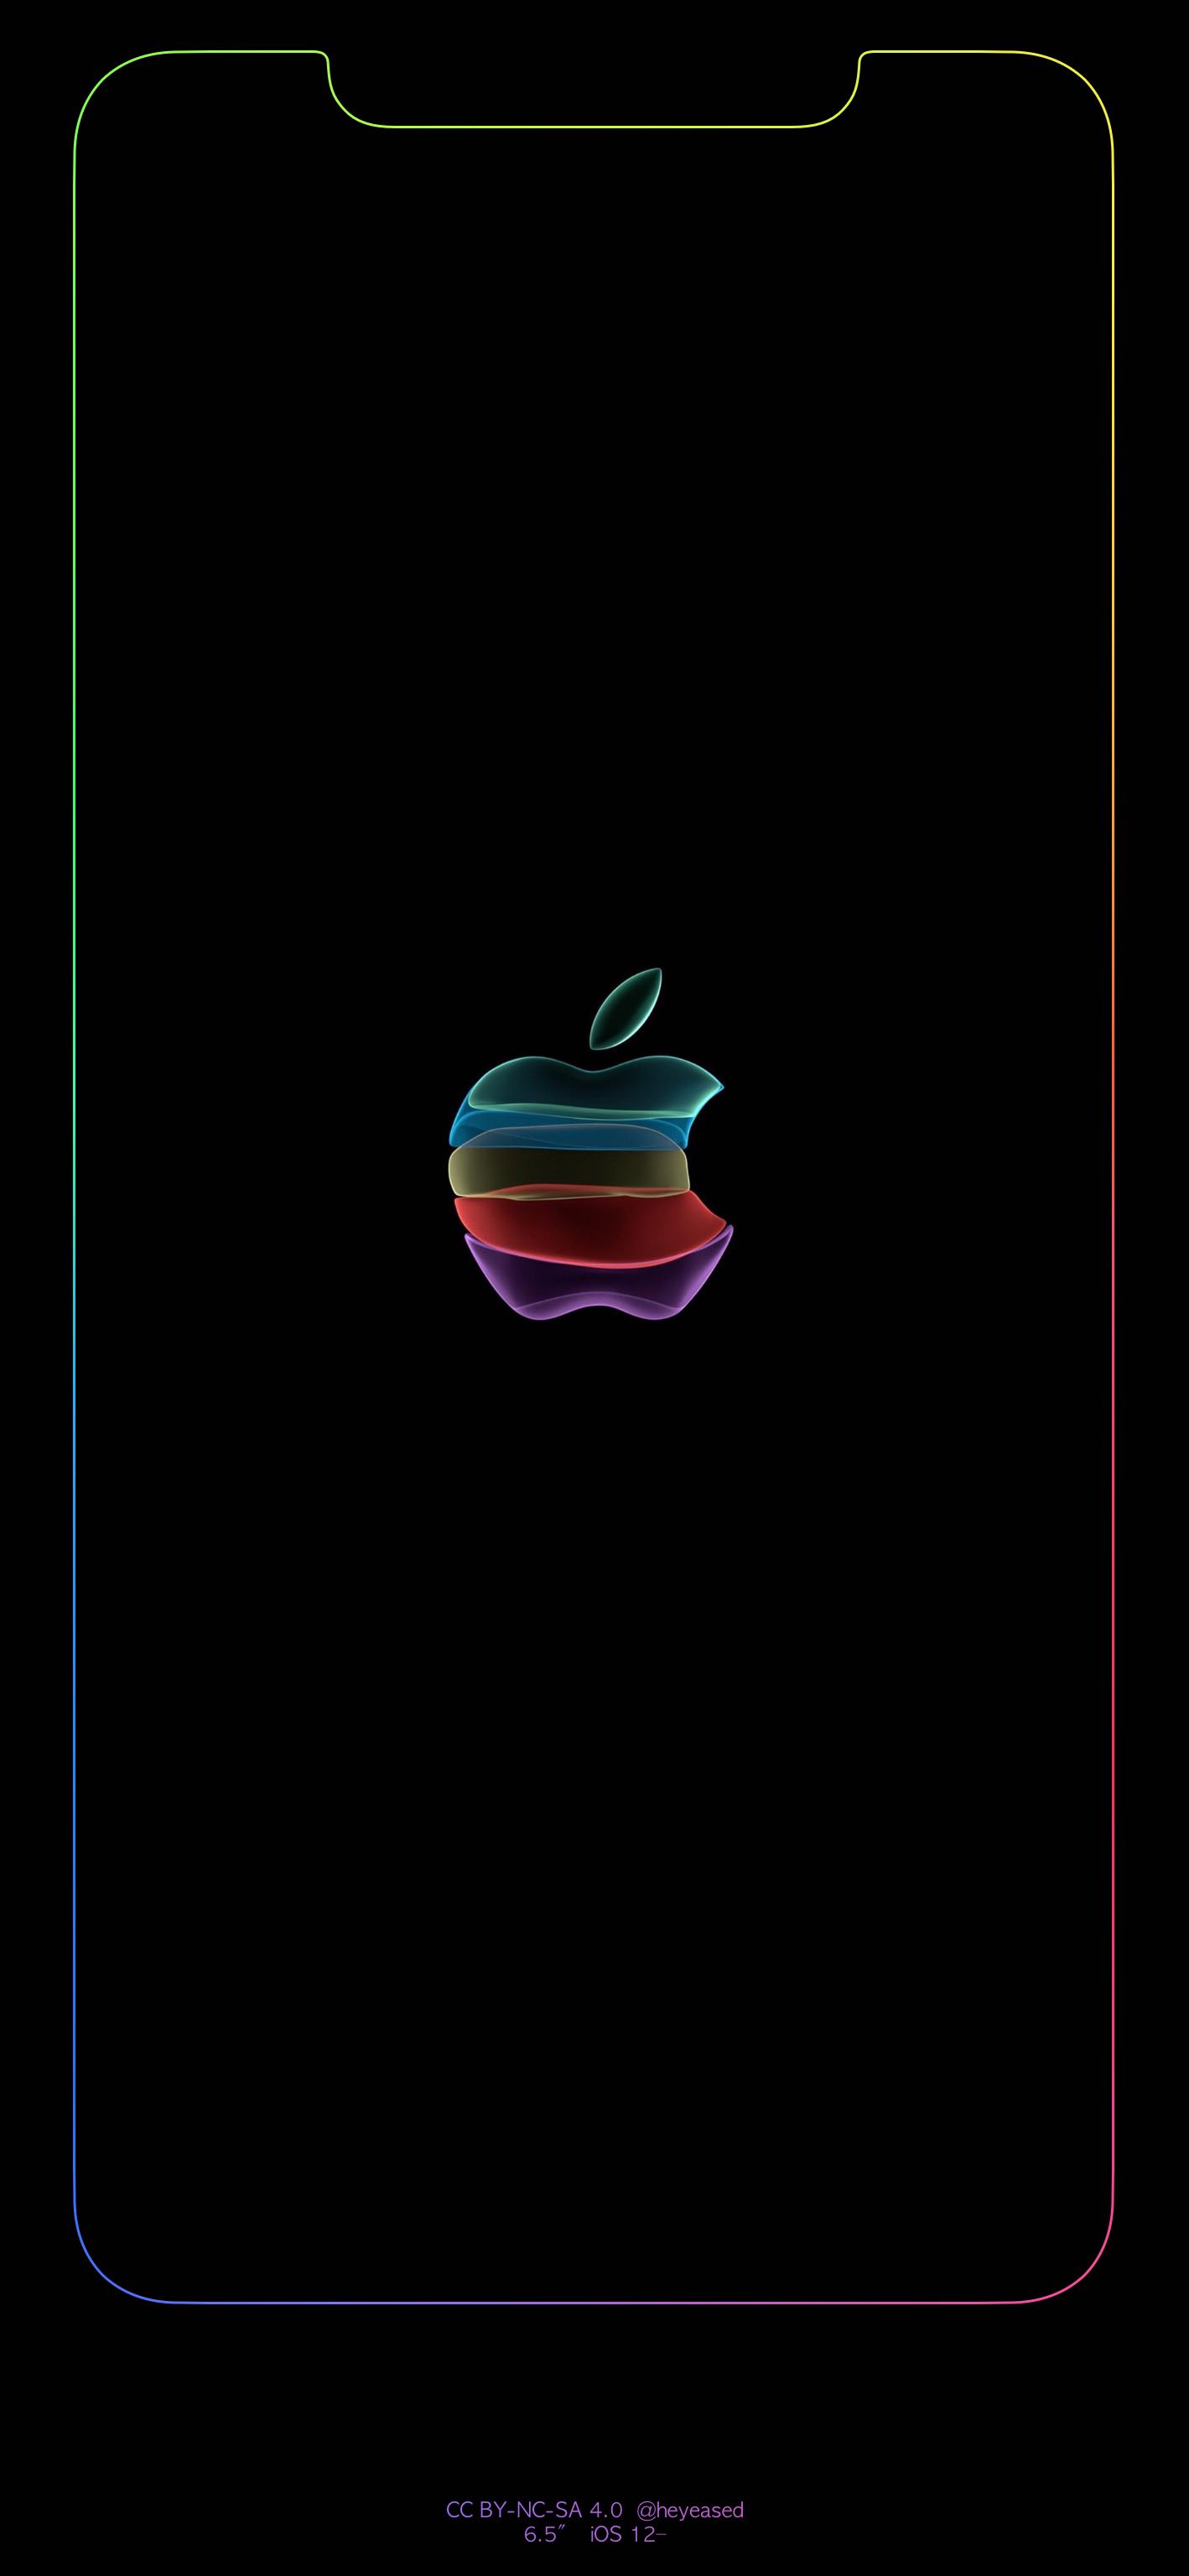 iPhone 11 and iPhone 11 Pro Wallpapers  iLikeWallpaper